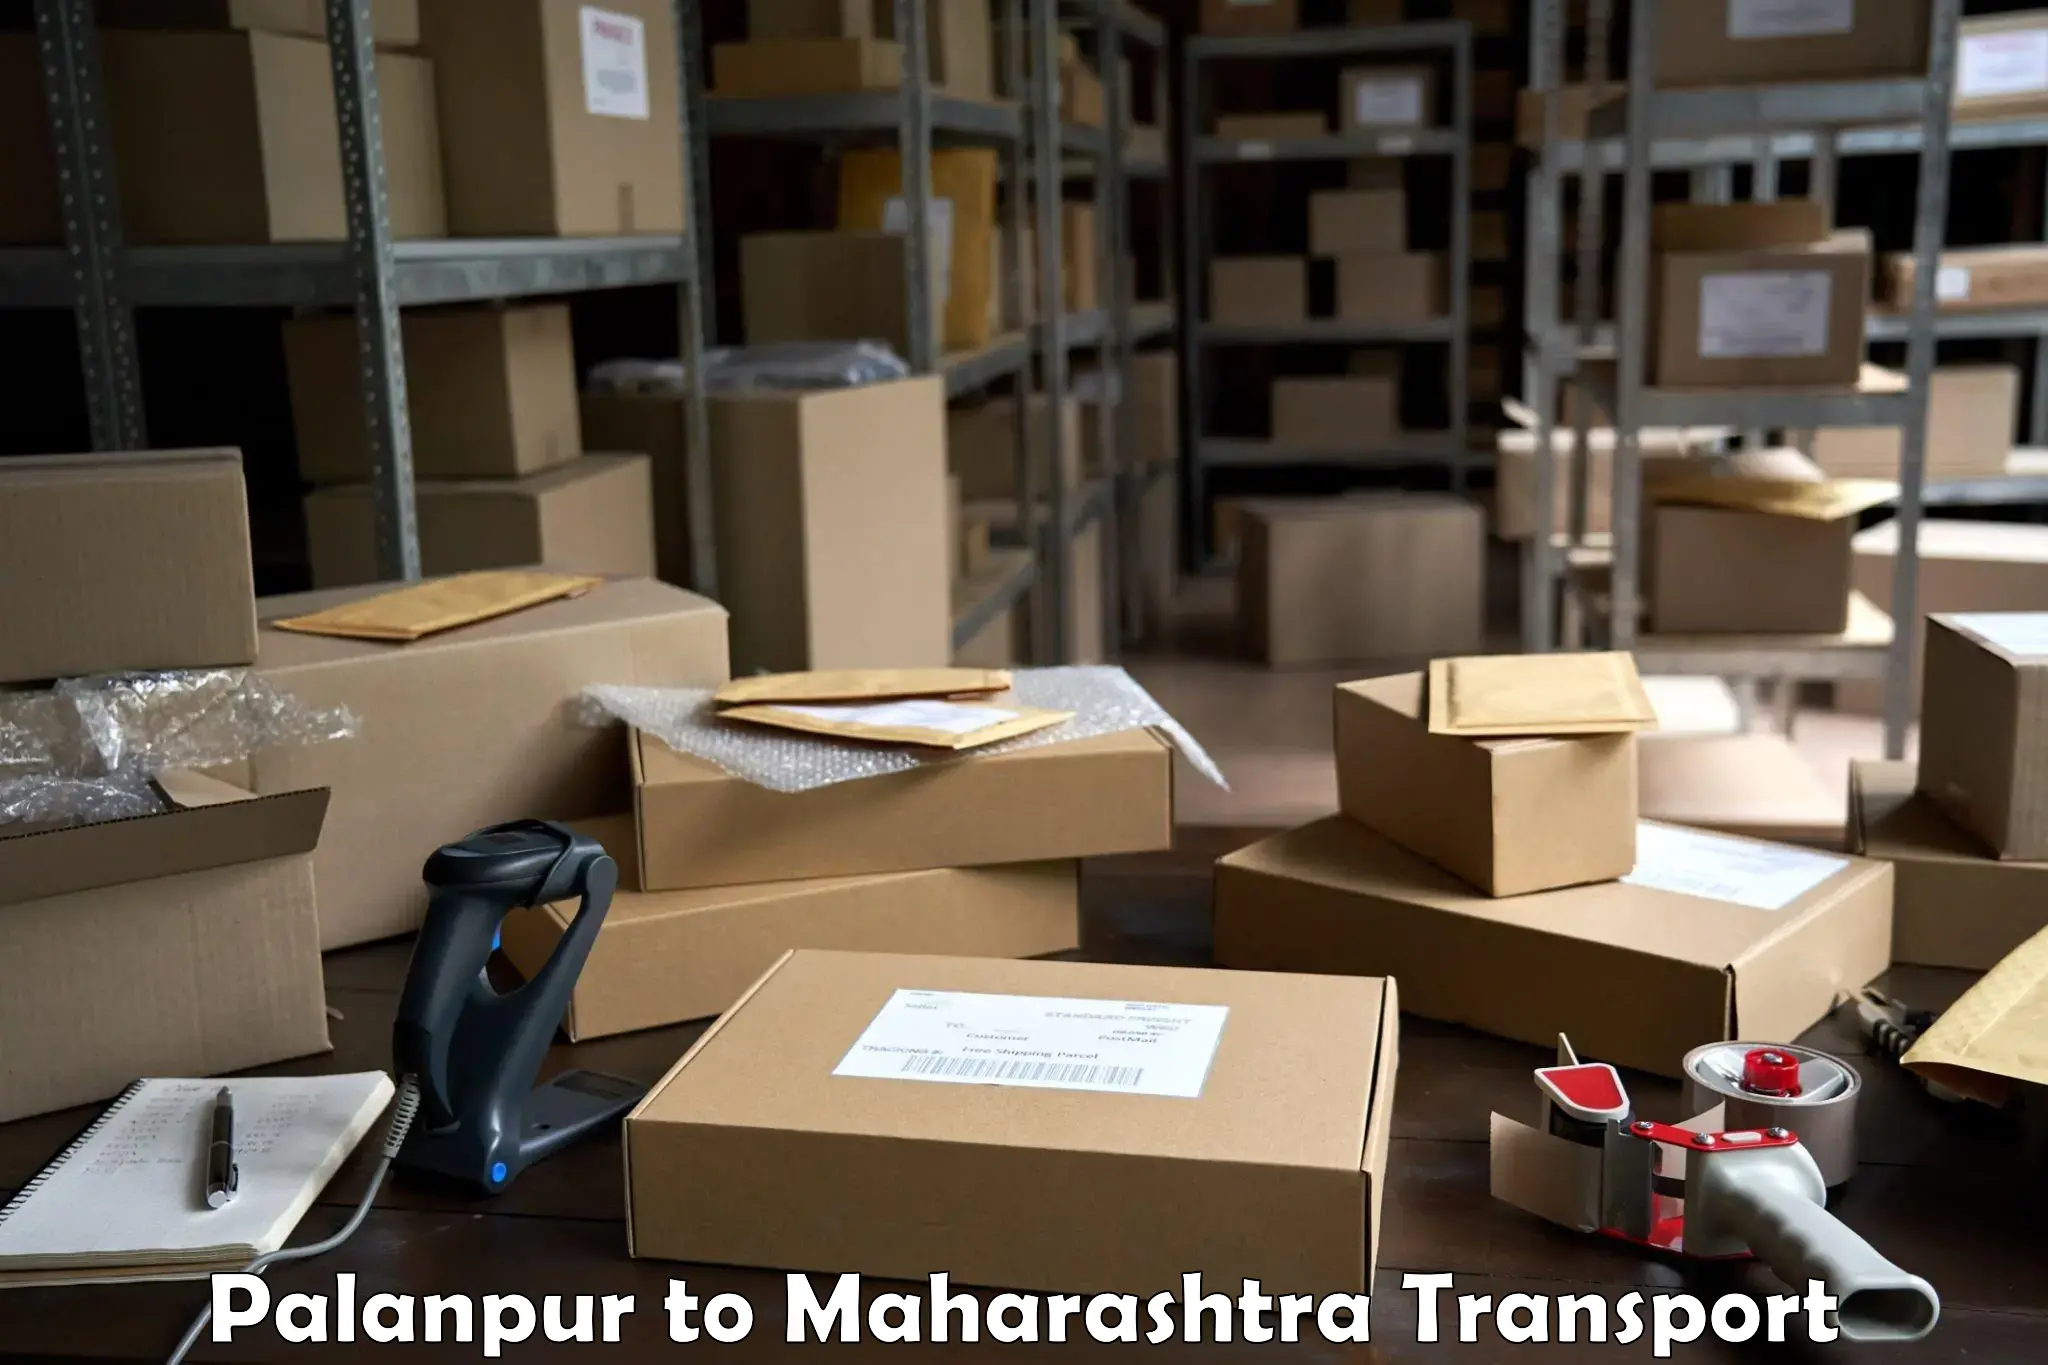 Road transport online services Palanpur to Ahmednagar